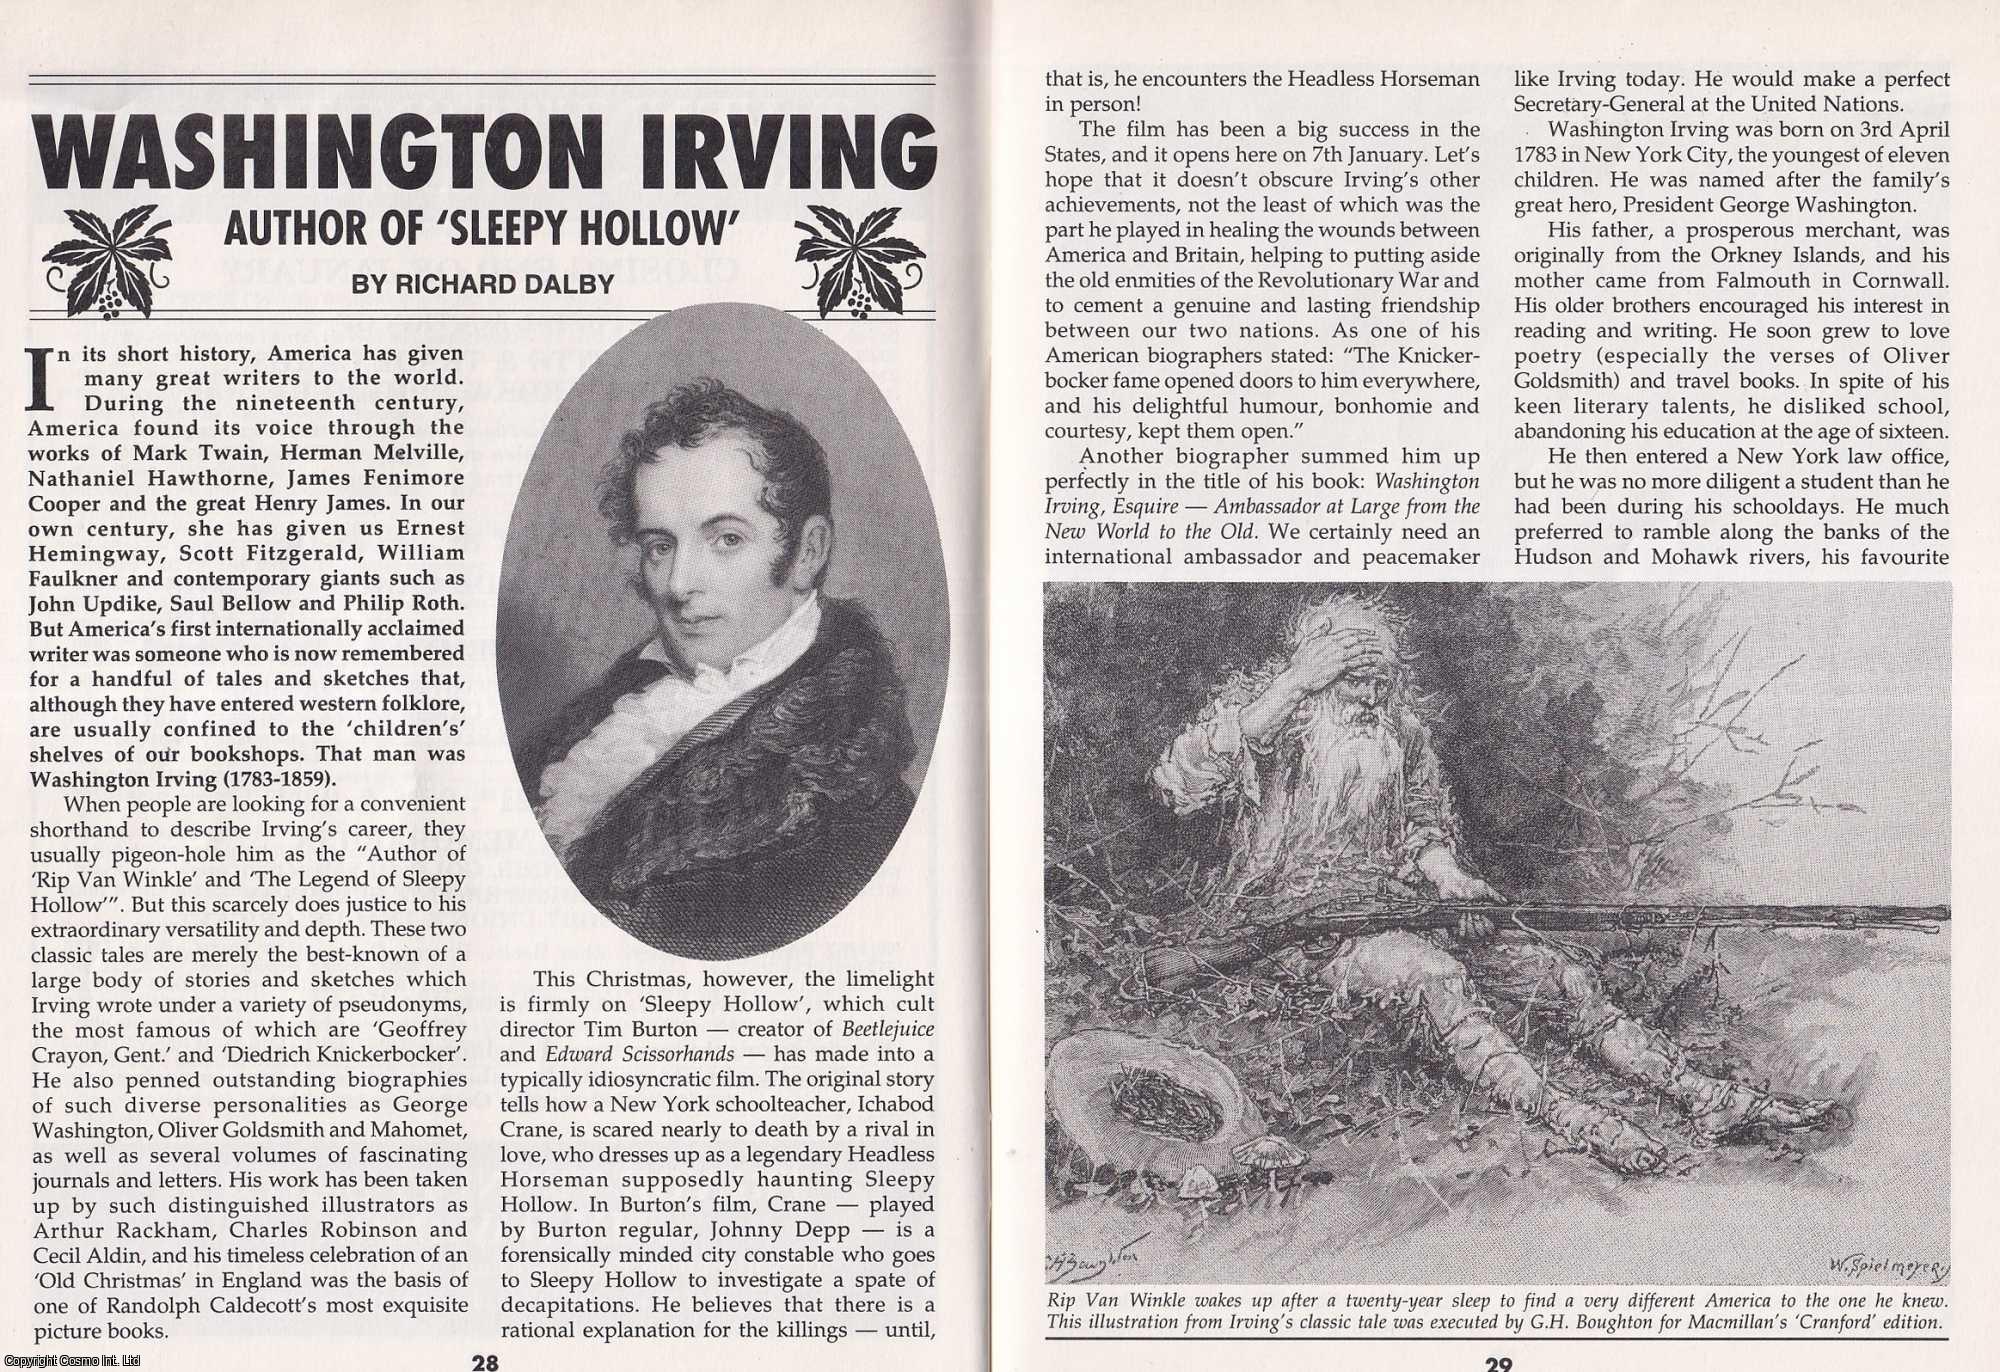 Richard Dalby - Washington Irving. Author of Sleepy Hollow. This is an original article separated from an issue of The Book & Magazine Collector publication.